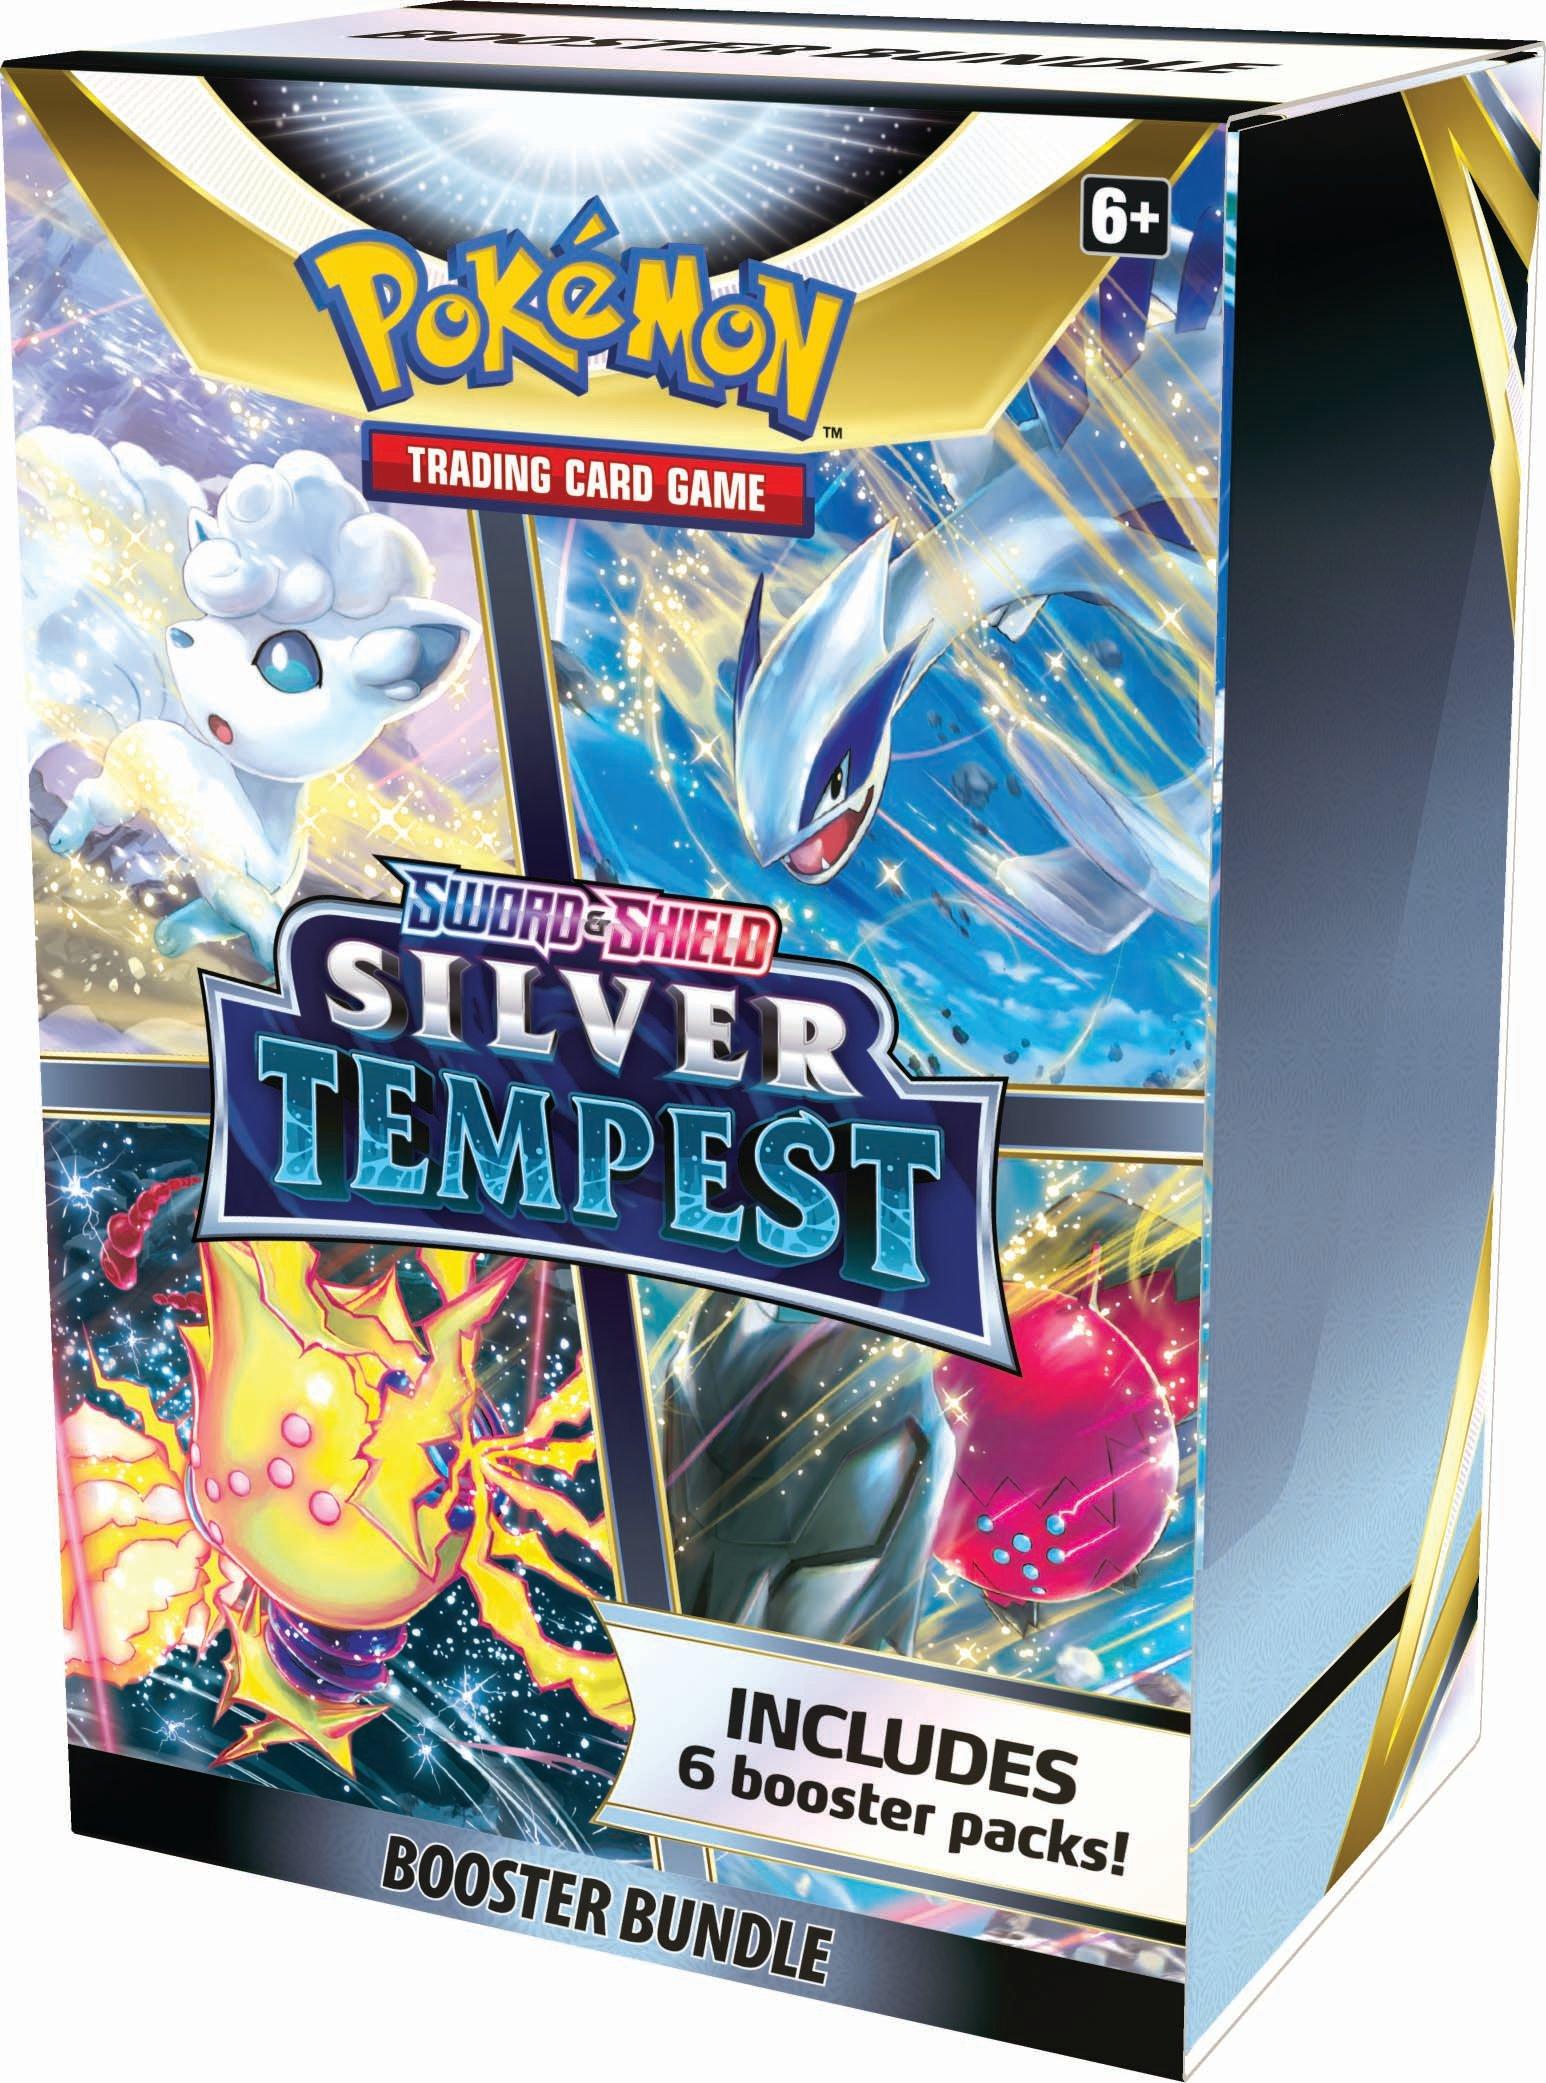 list item 2 of 3 Pokemon Trading Card Game: Sword and Shield Silver Tempest Booster Bundle